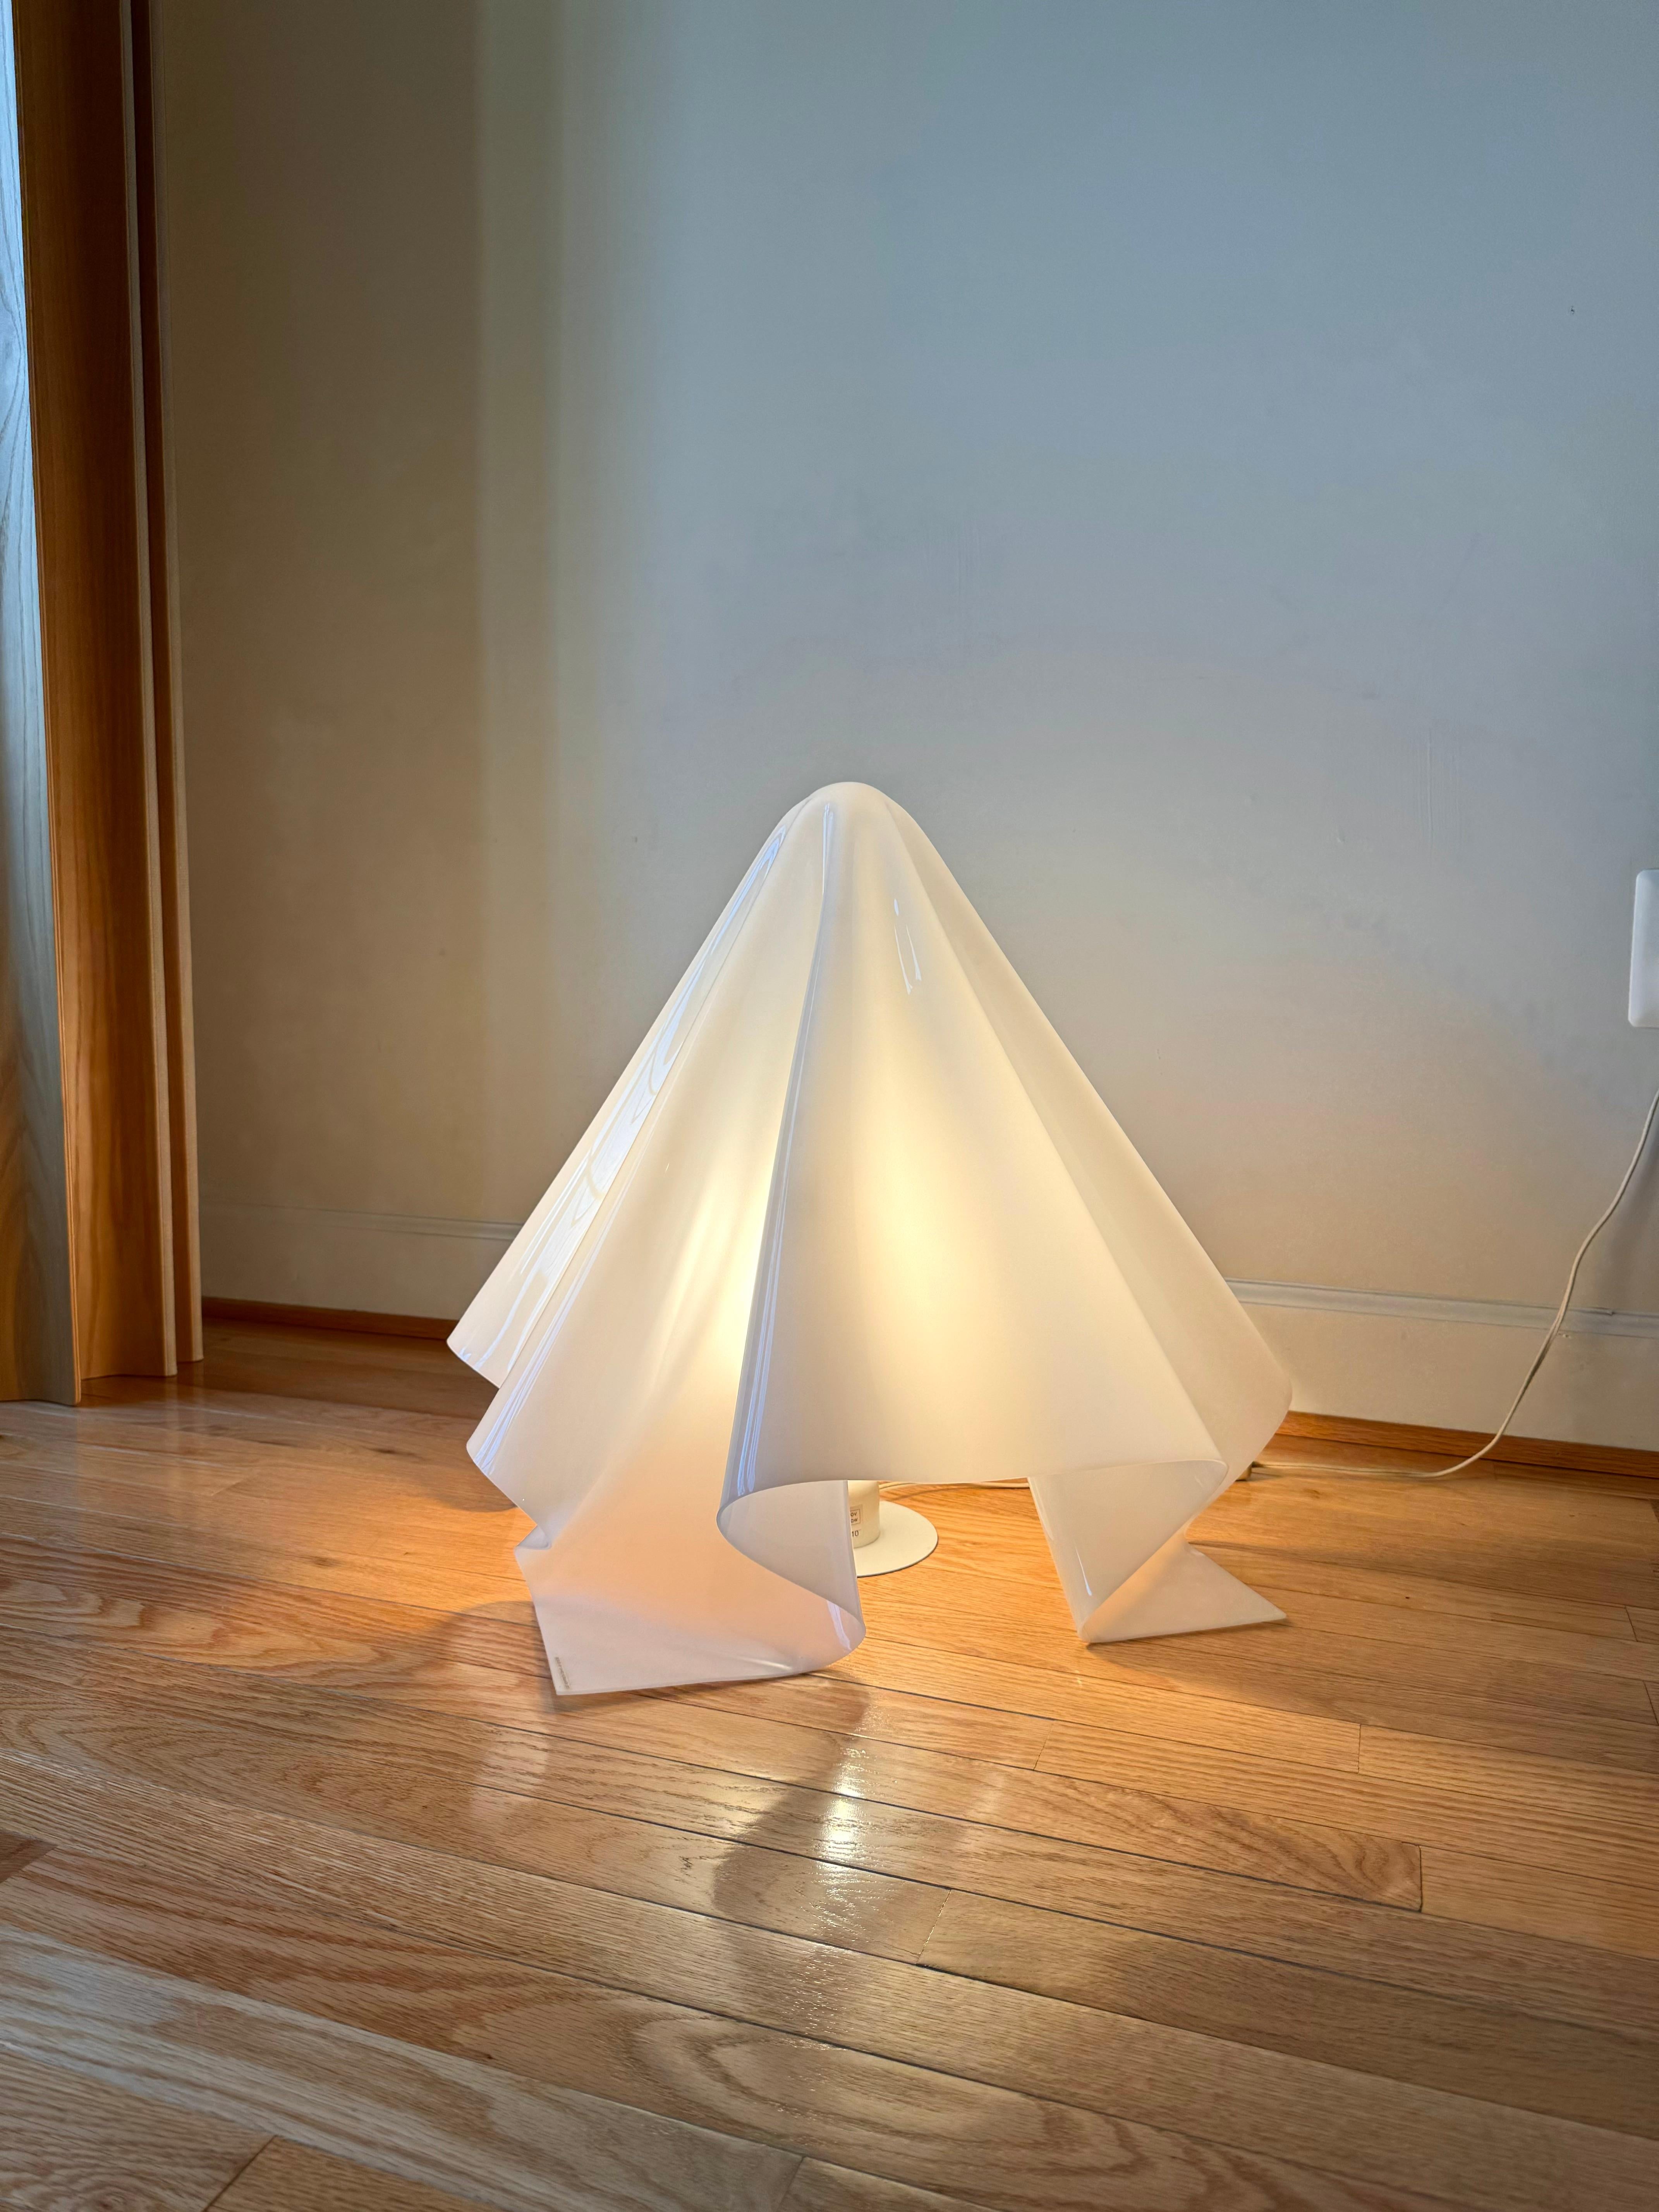 Rare early K-series (Oba- Q/Ghost) table lamp by Shiro Kuramata (Large) For Sale 1